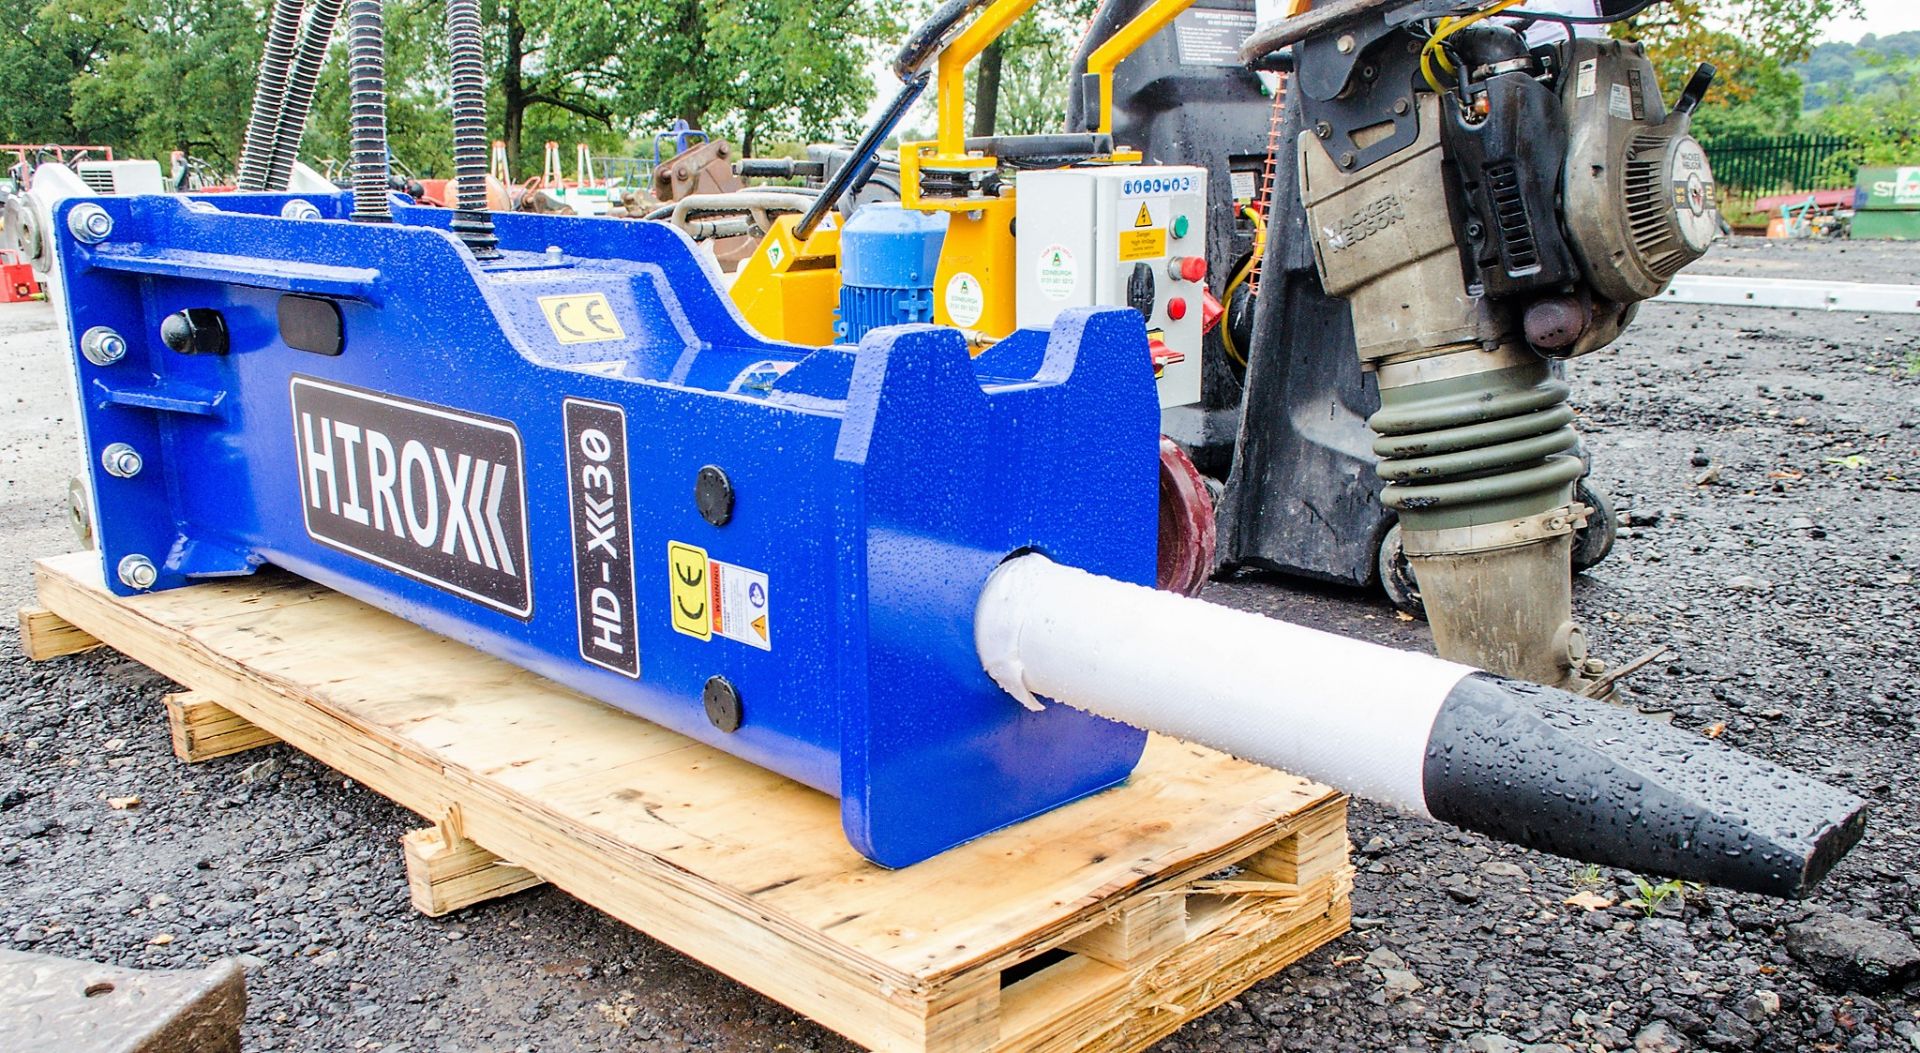 Hirox HD-X30 10 to 15 tonne hydraulic breaker Gassed & pre delivery inspected ** New & unused **